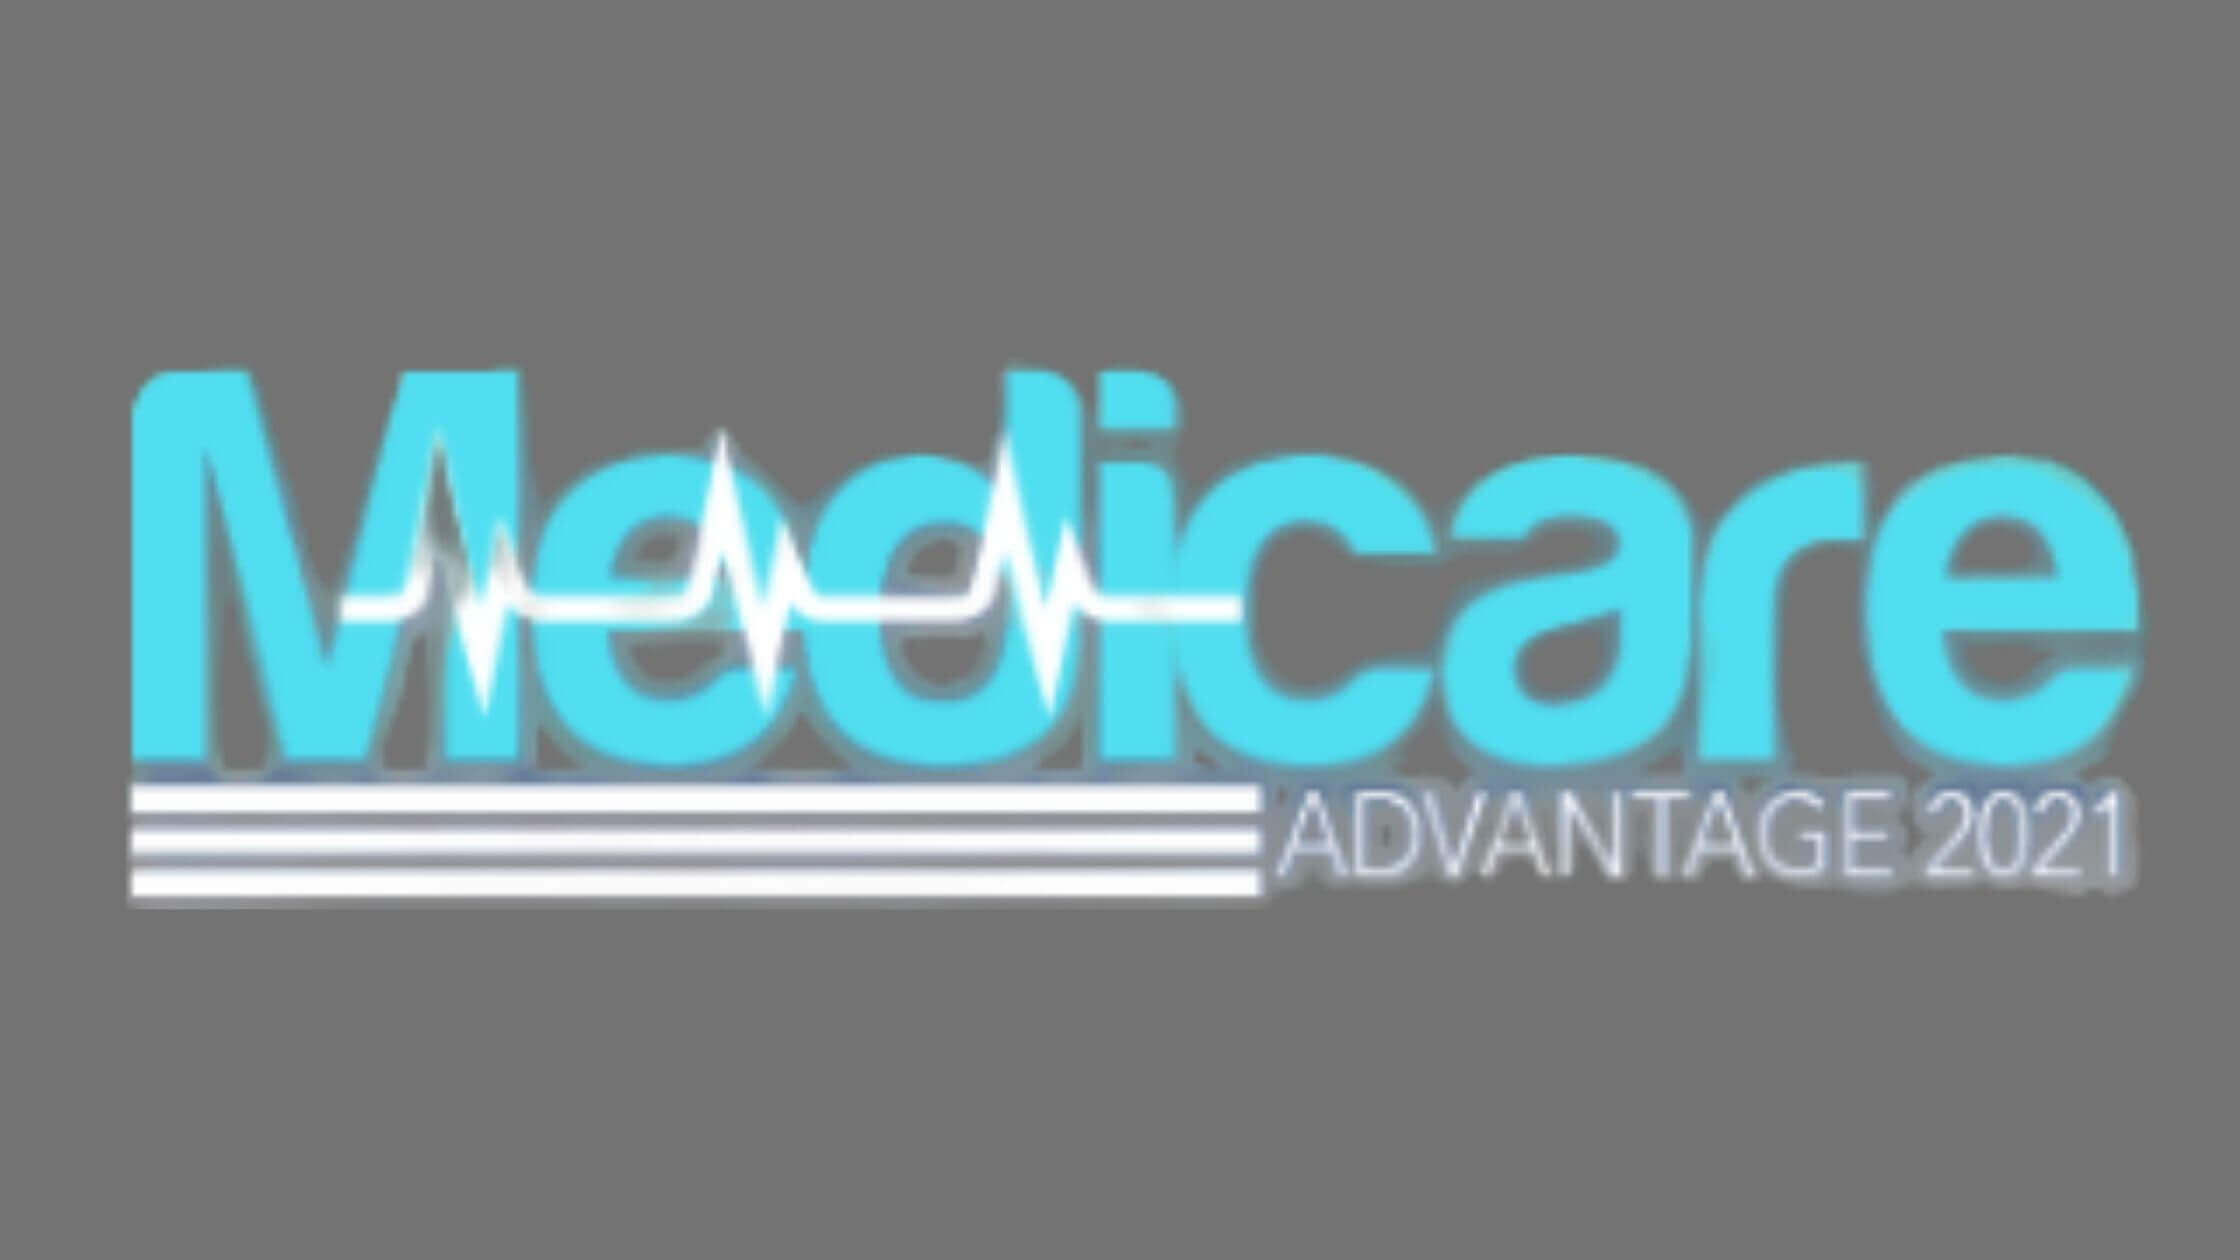 medicare-advantage-2021-is-one-of-the-best-options-to-choose-suitable-medicare-plans